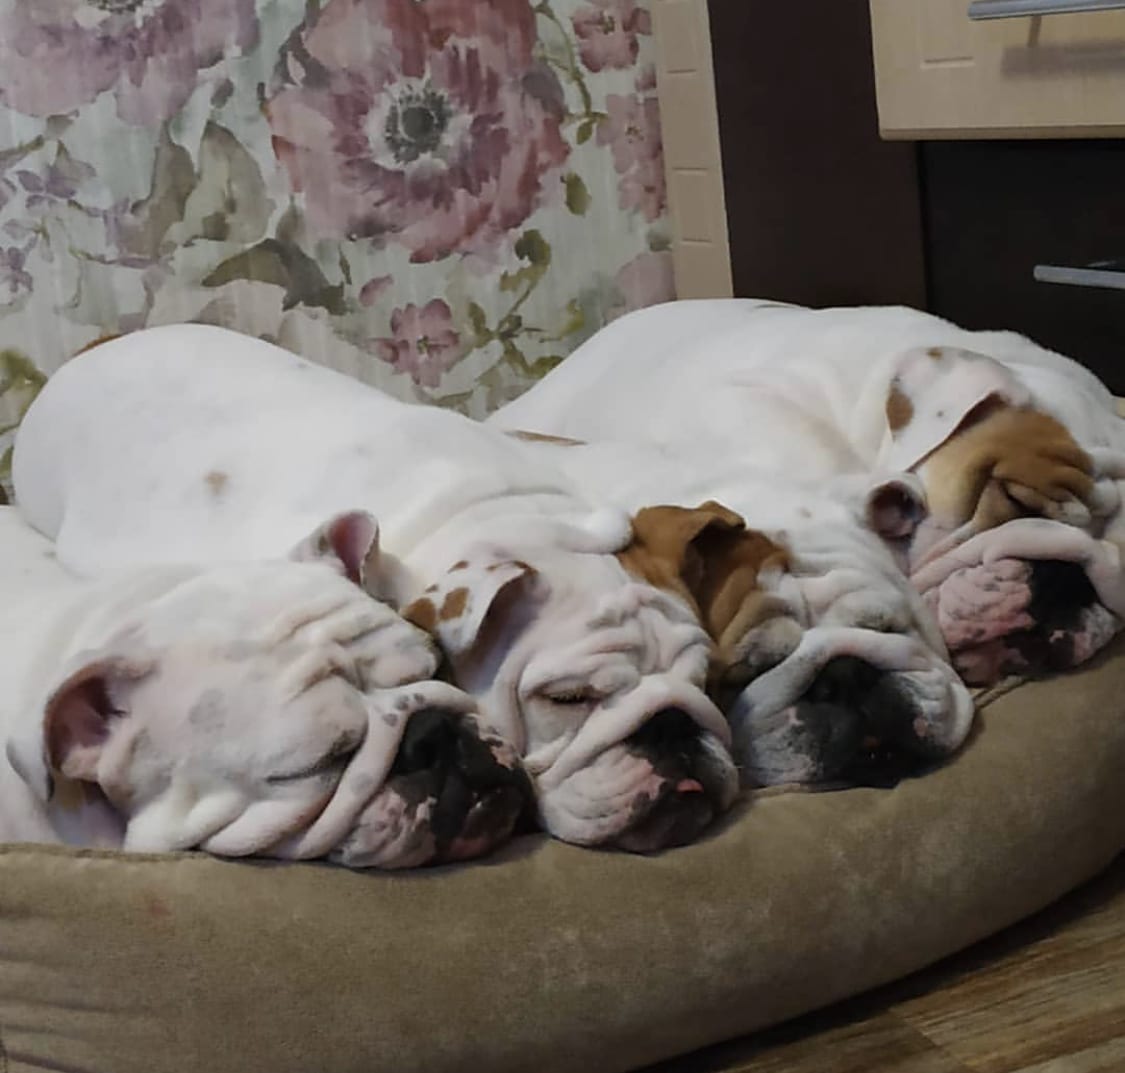 Four English Bulldogs sleeping next to each other on their bed